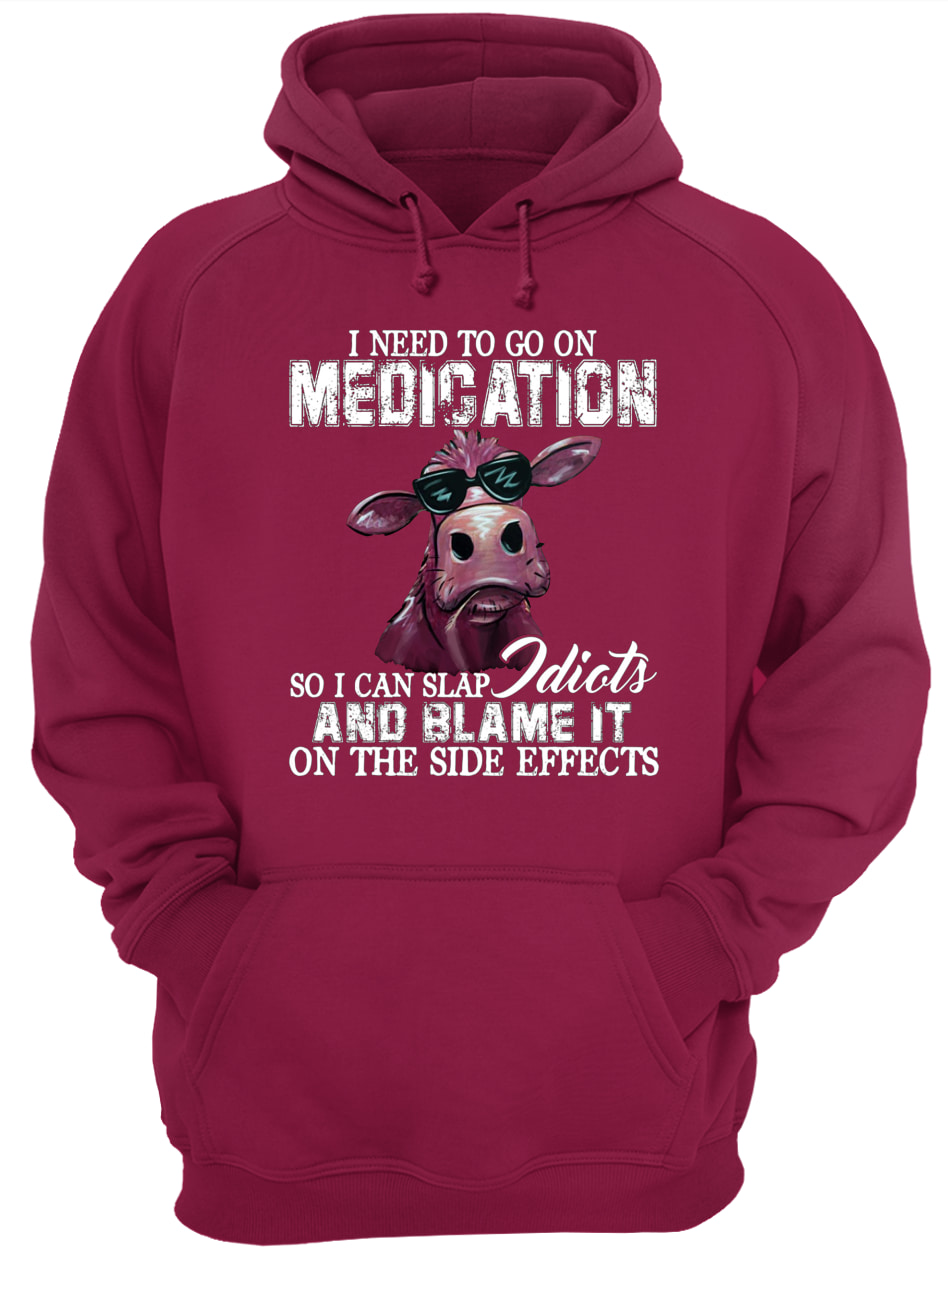 I need to go on medication so I can slap idiots and blame it on the side effects cow hoodie